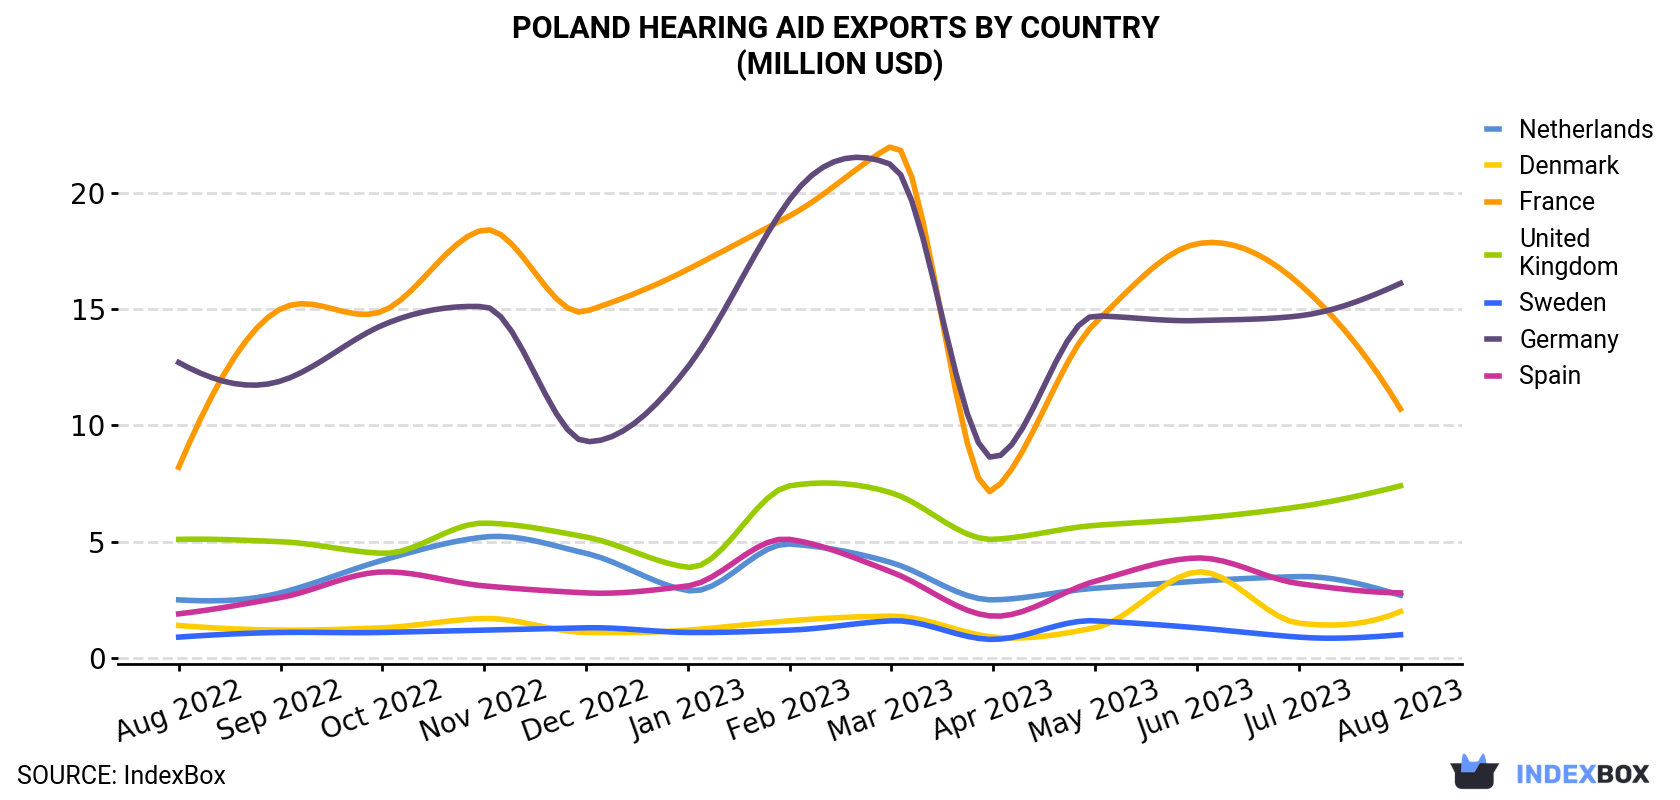 Poland Hearing Aid Exports By Country (Million USD)